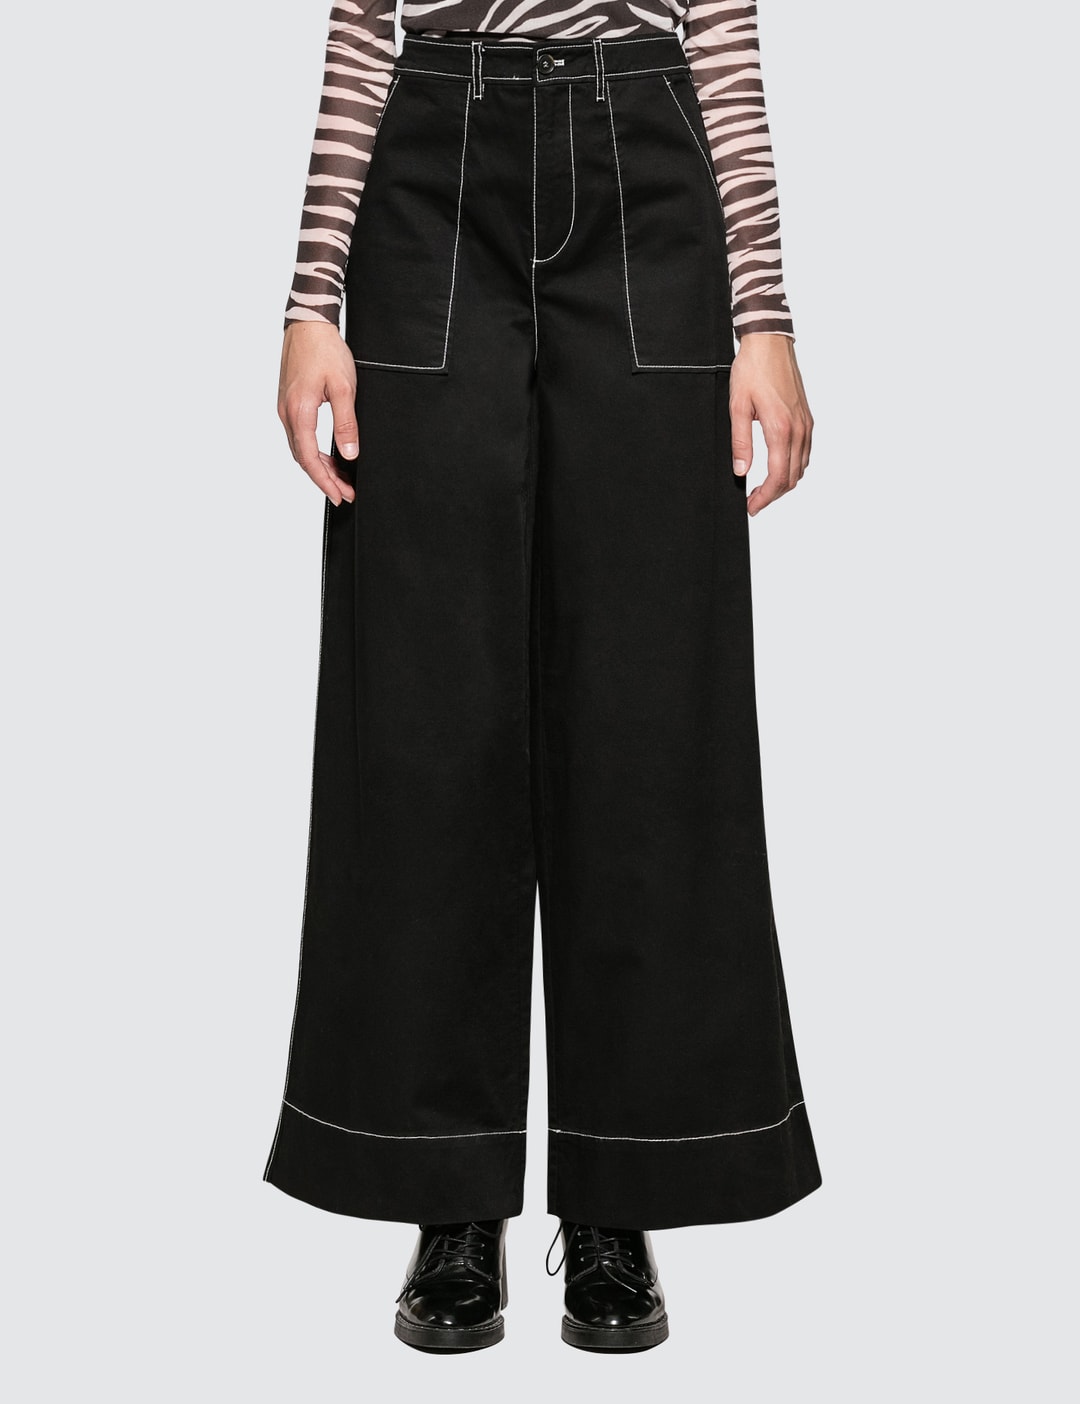 Ganni - Hewson Pants | HBX - Globally Curated Fashion and Lifestyle by ...